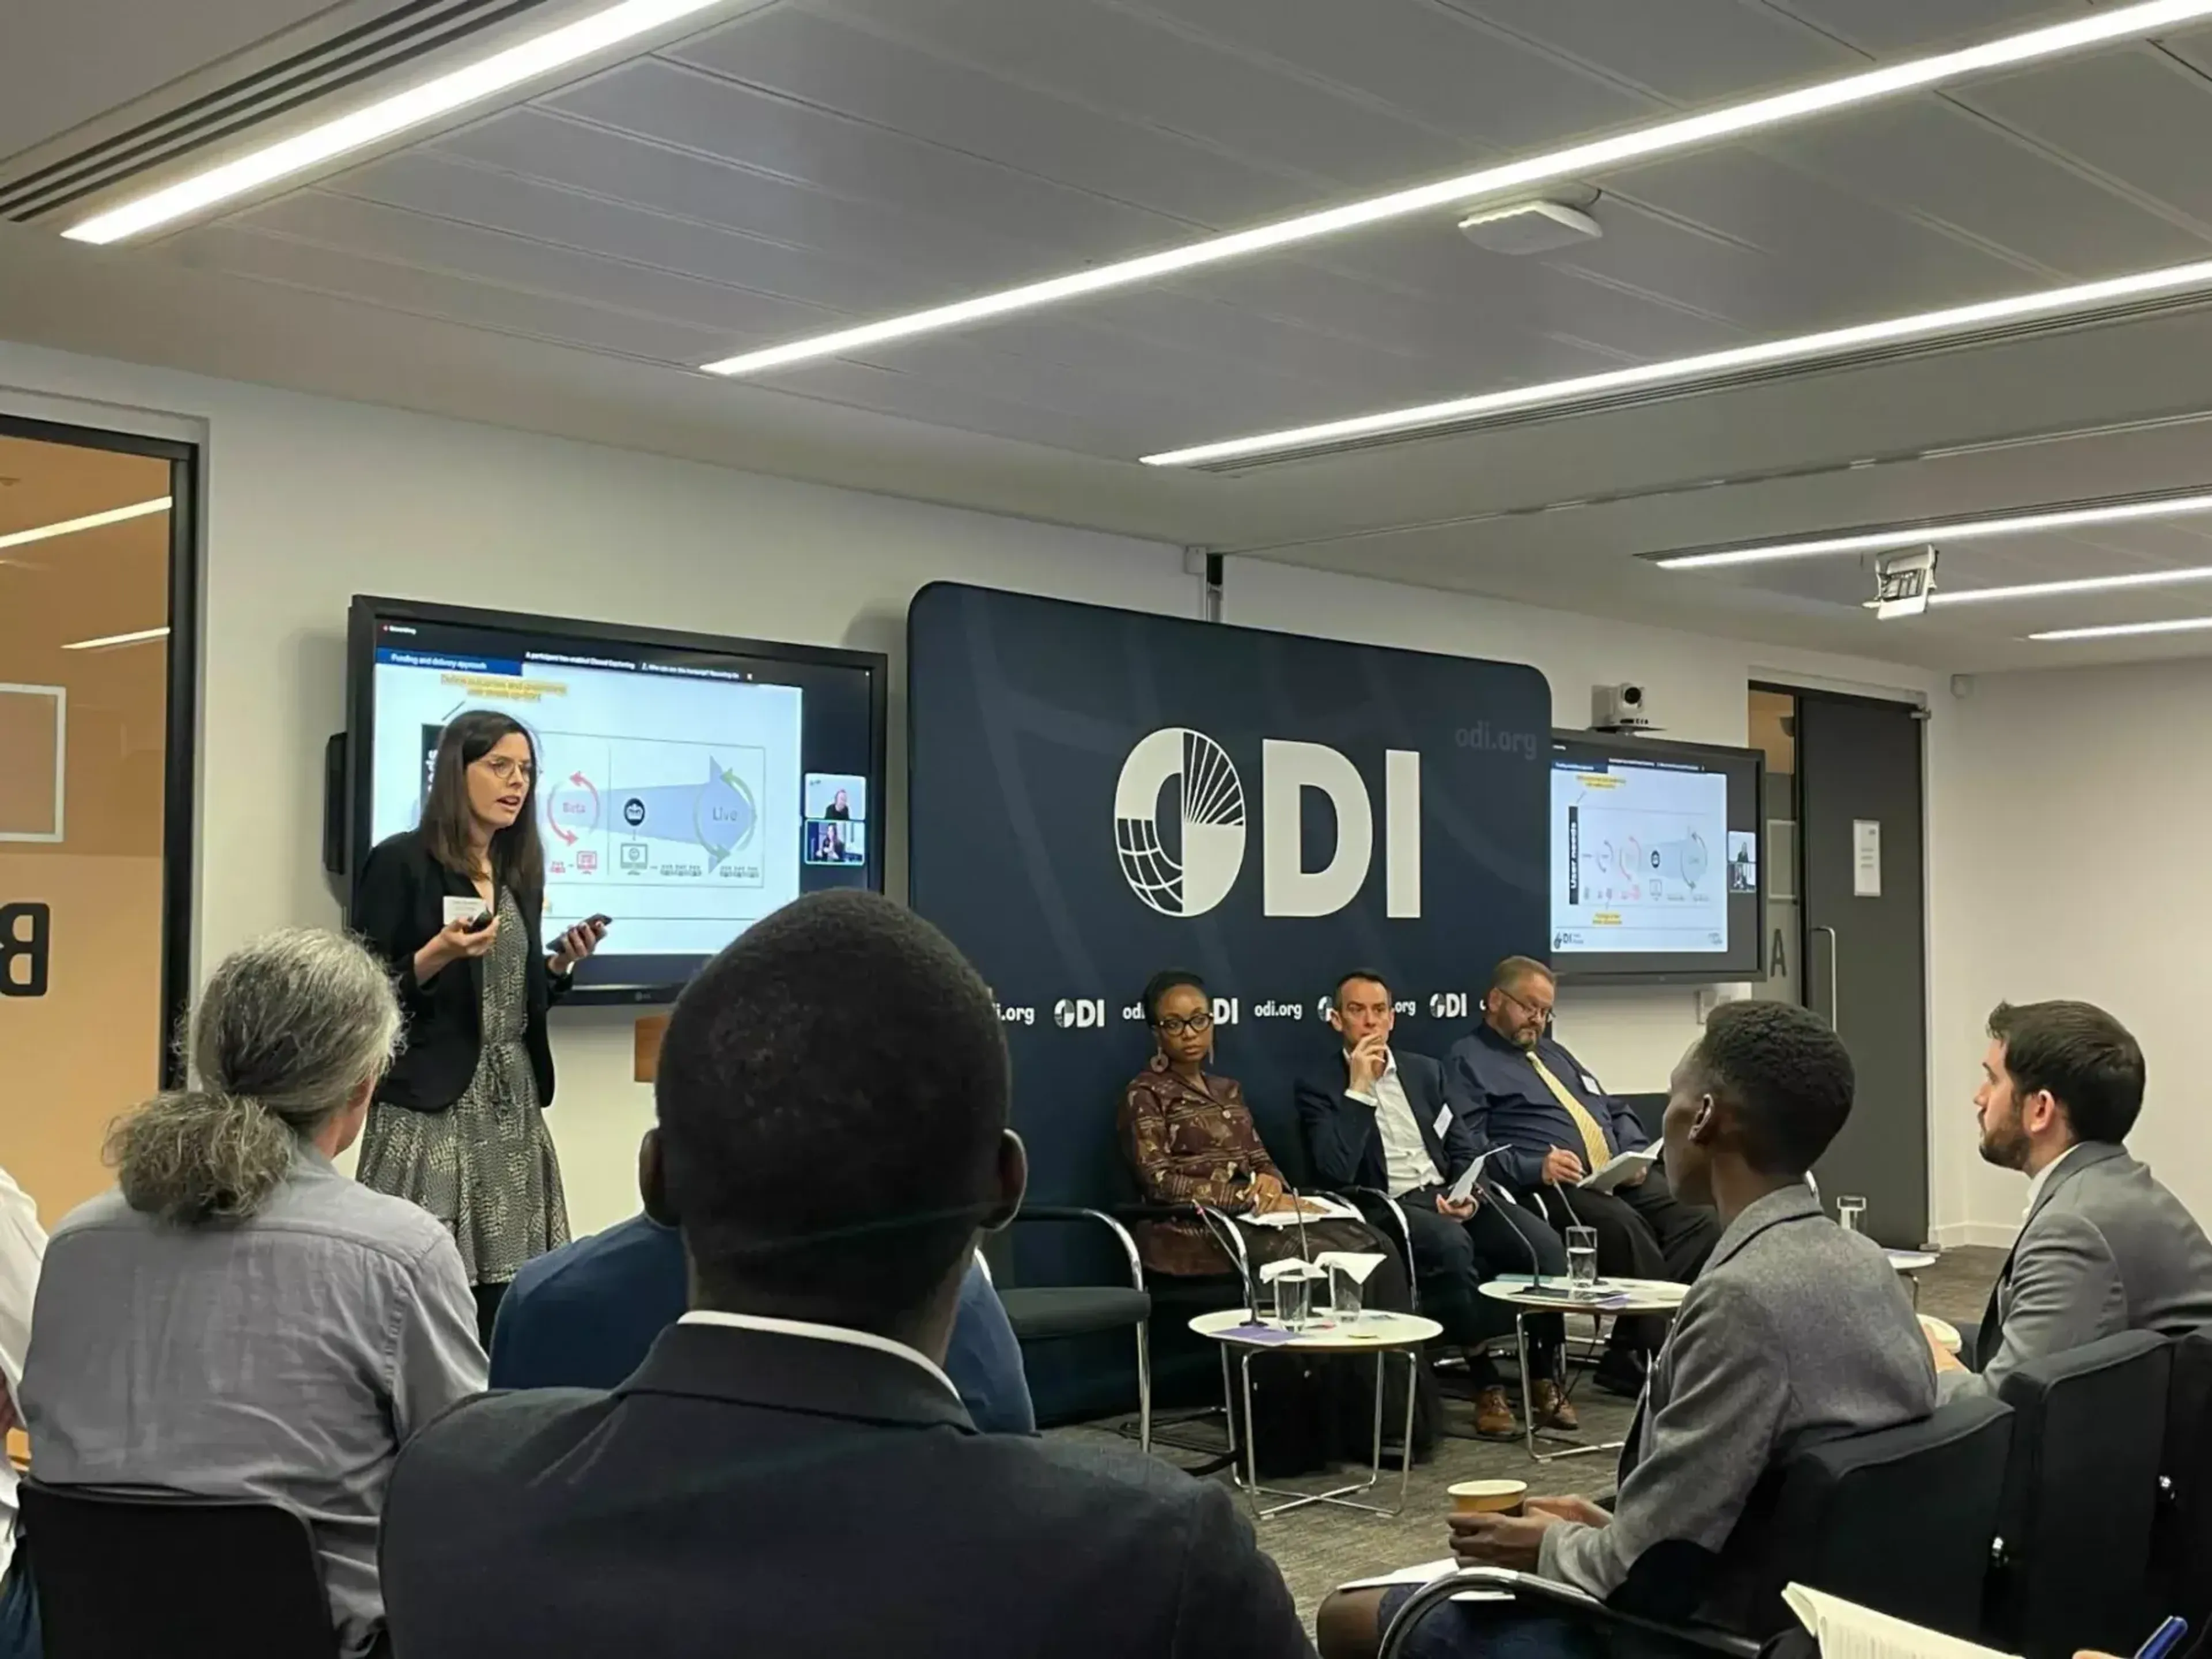 Emily presenting at a Budgets and Bytes PFM event co-hosted by ODI in March